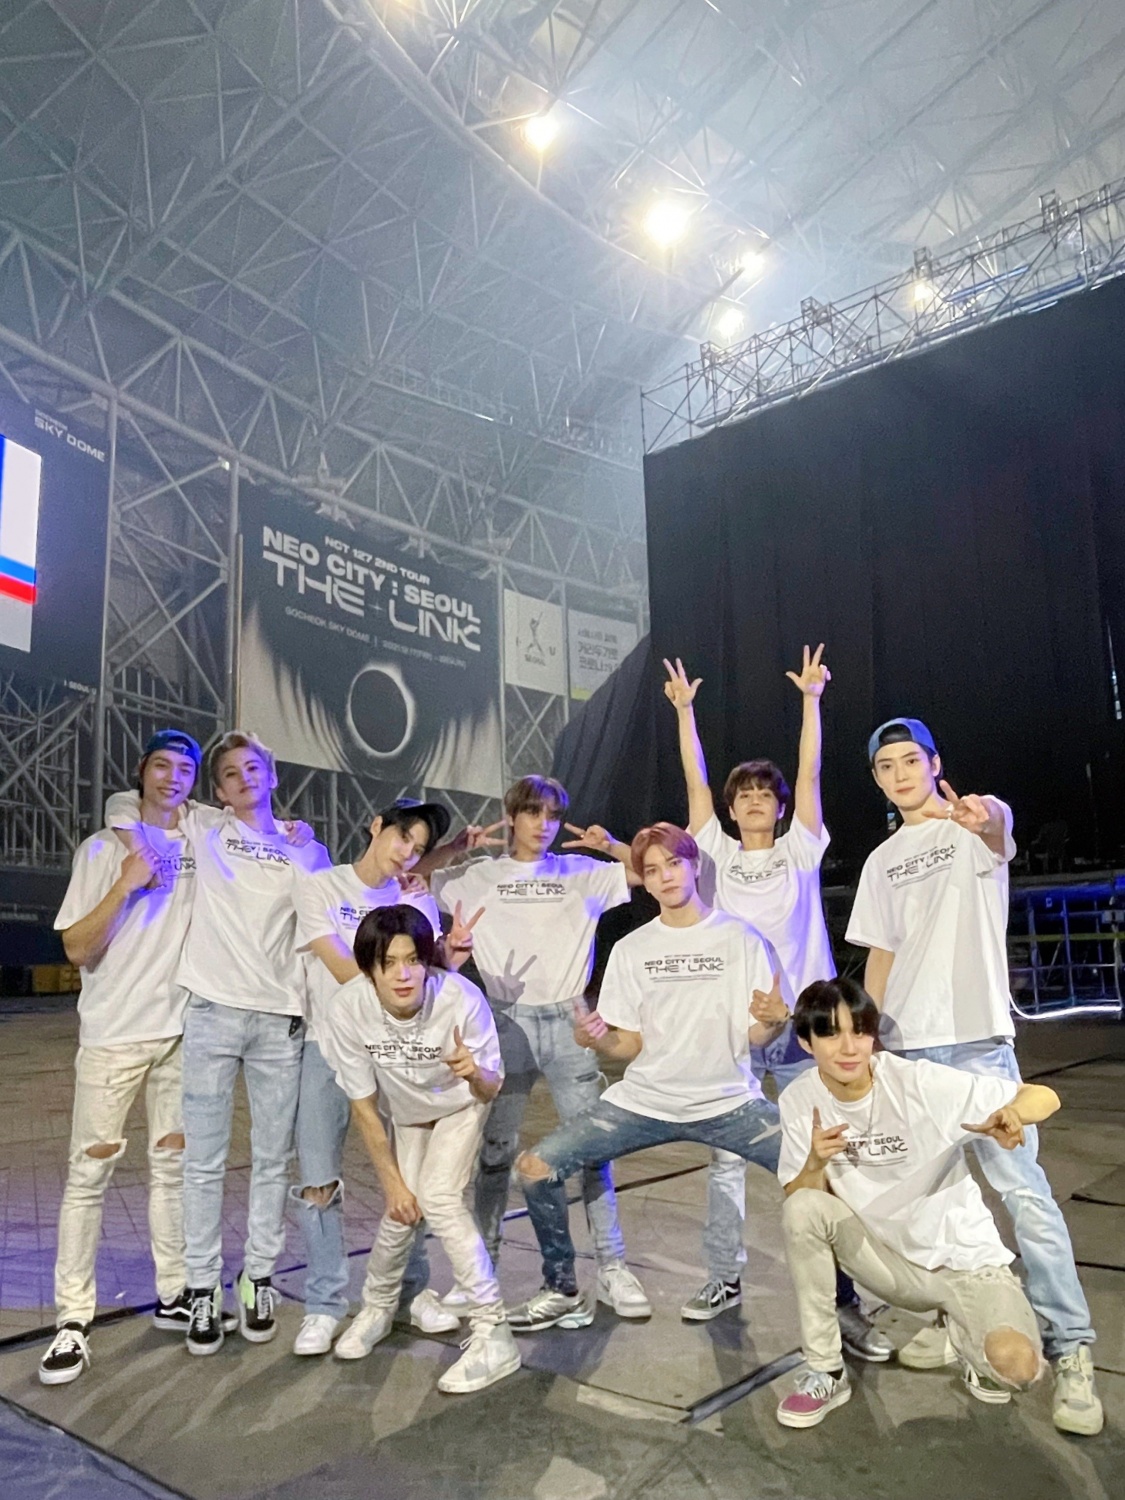 NCT 127's second solo concert is a success... "Nice to meet you after a long time"